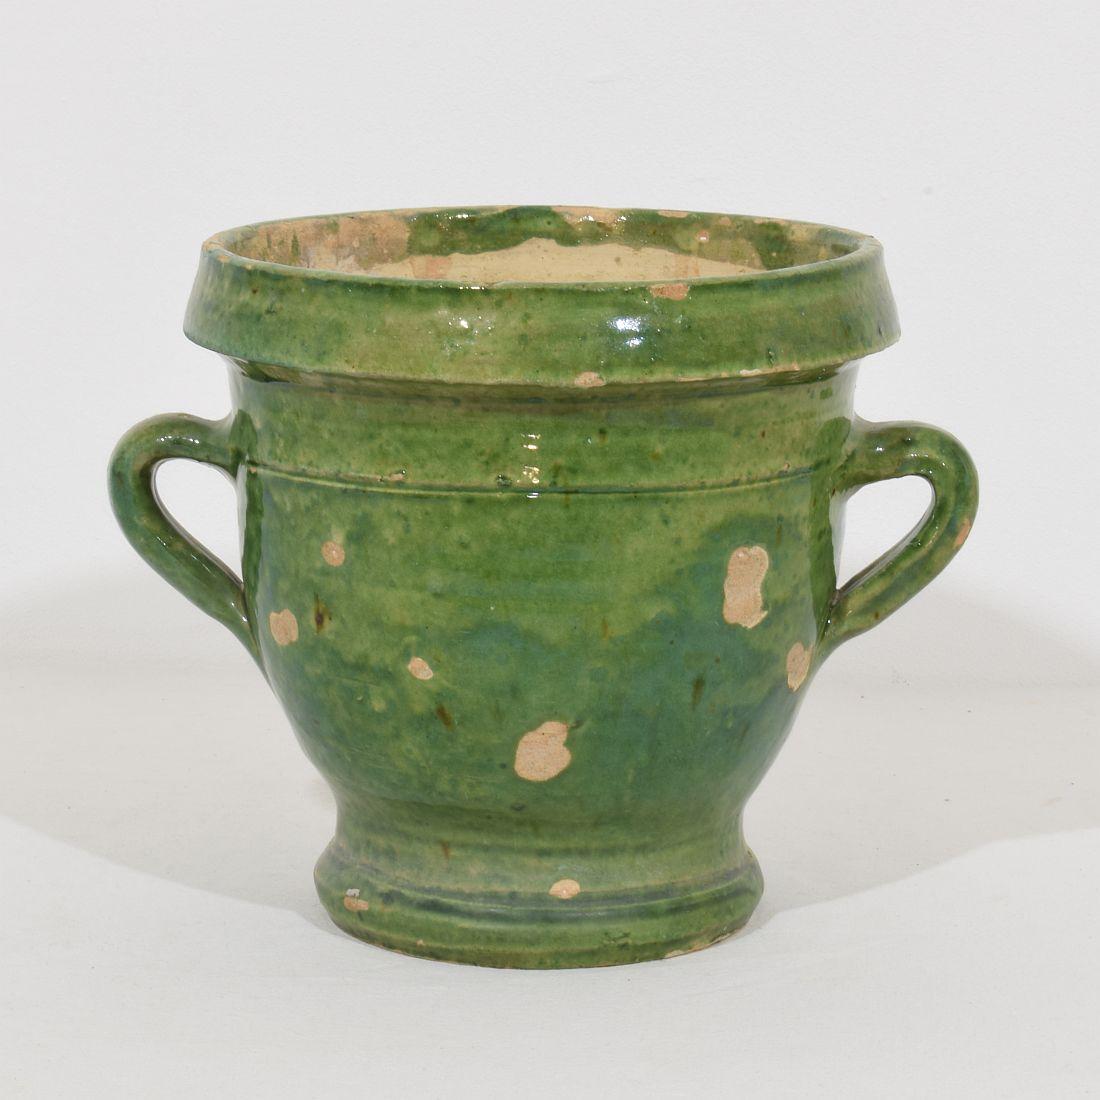 Beautiful small glazed earthenware castelnaudary planter, France, circa 1850-1900, Good weathered condition.